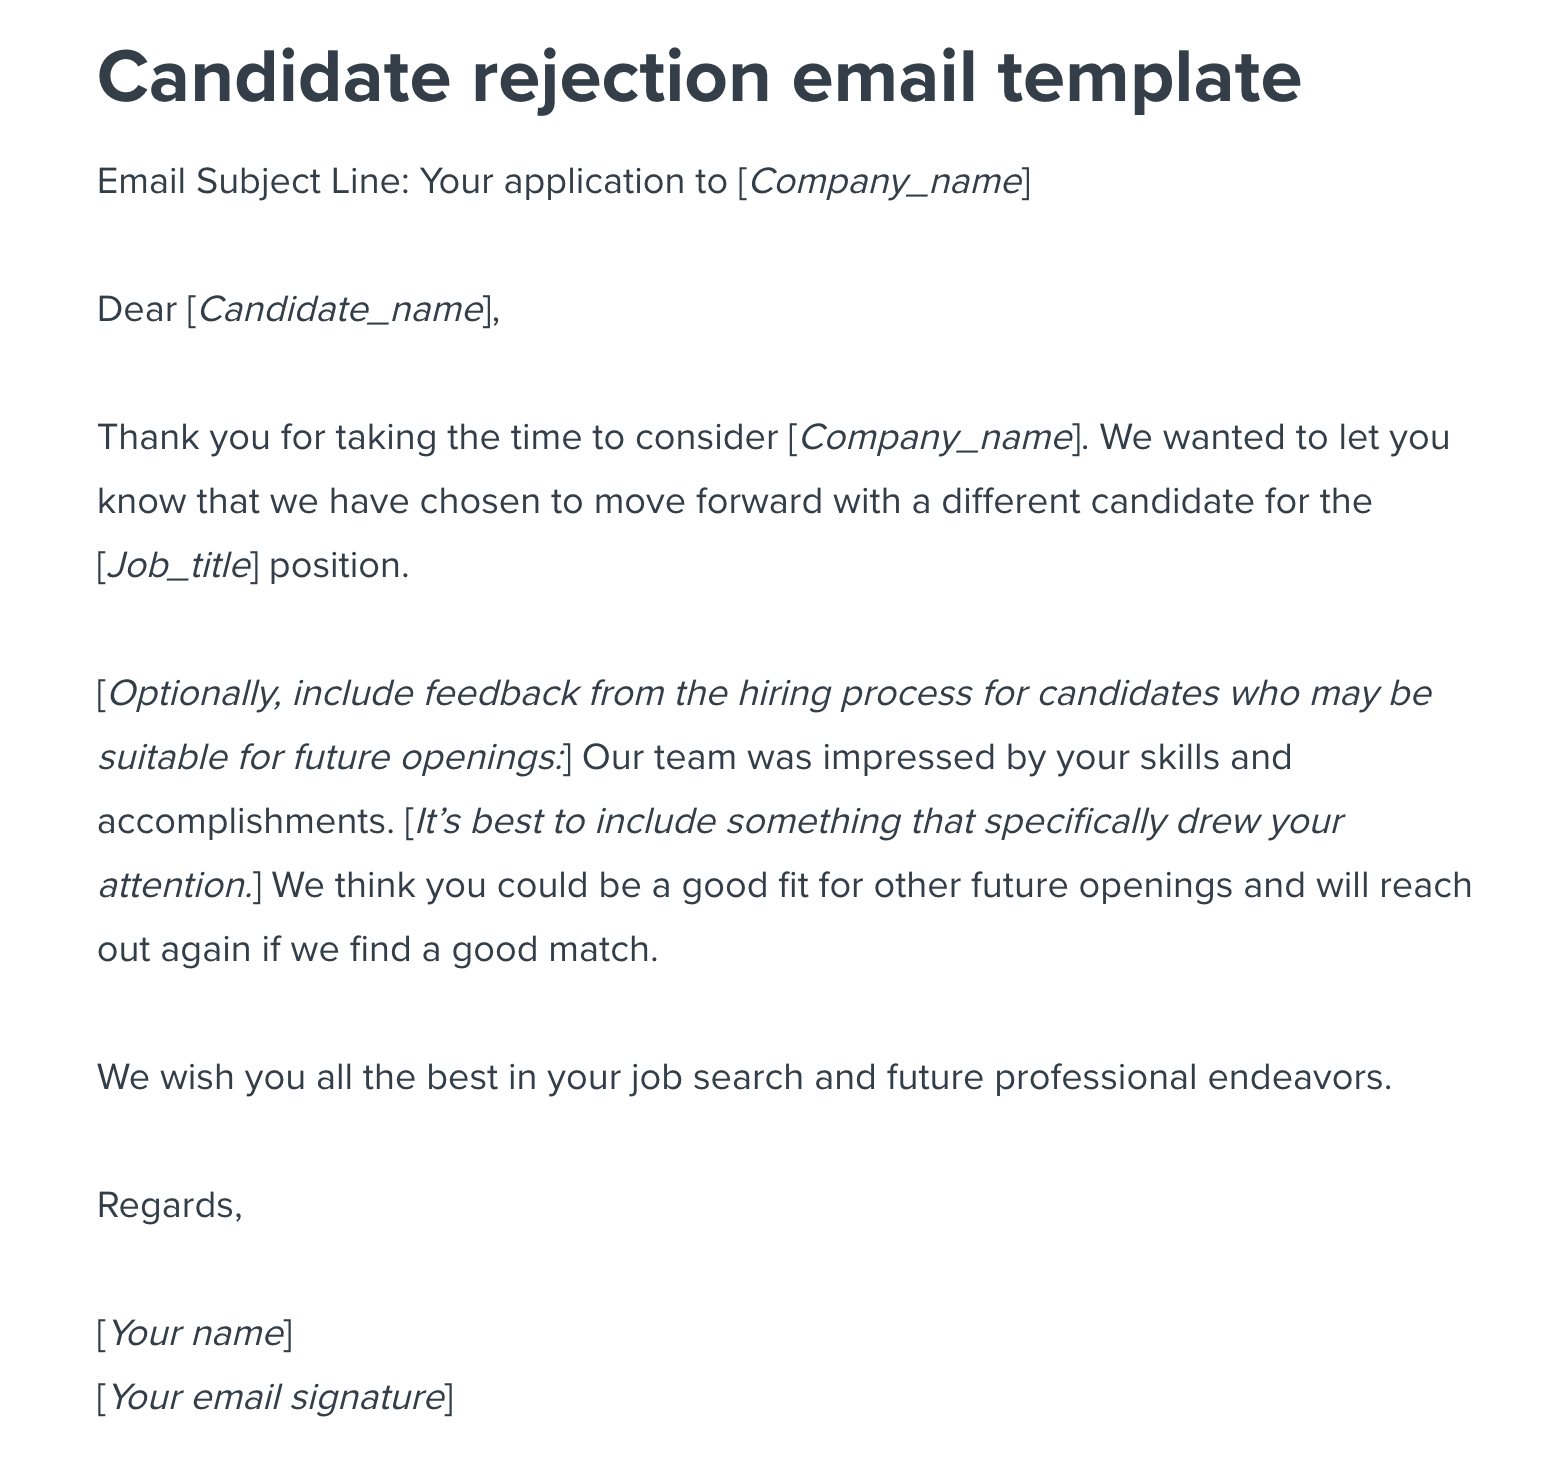 How To Write A Rejection Letter For An Applicant Onvacationswall